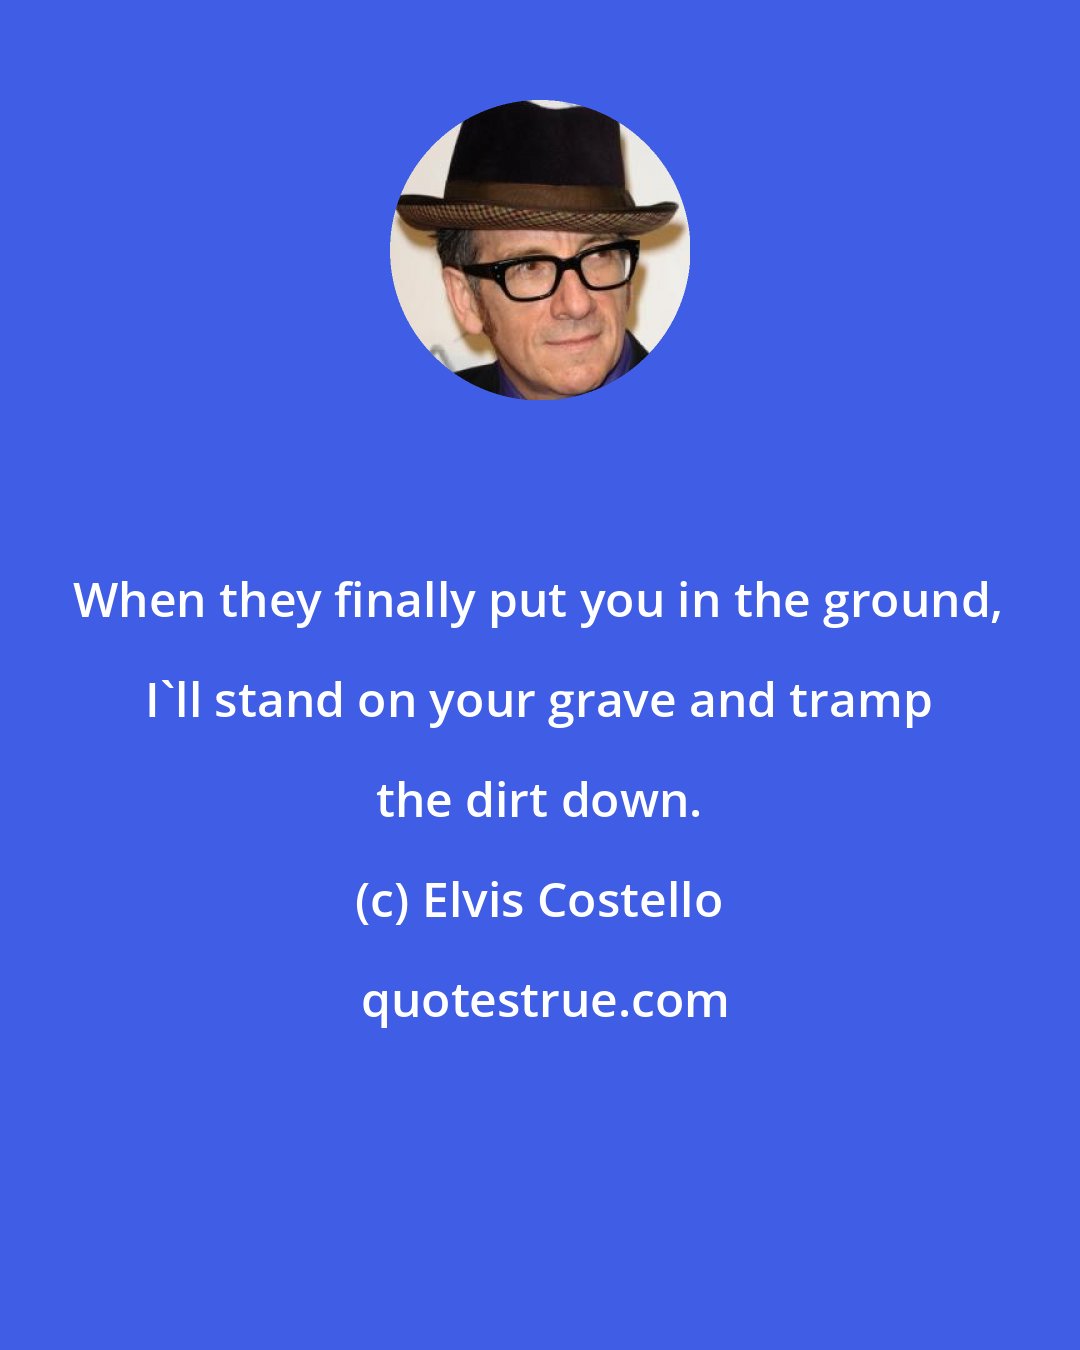 Elvis Costello: When they finally put you in the ground, I'll stand on your grave and tramp the dirt down.